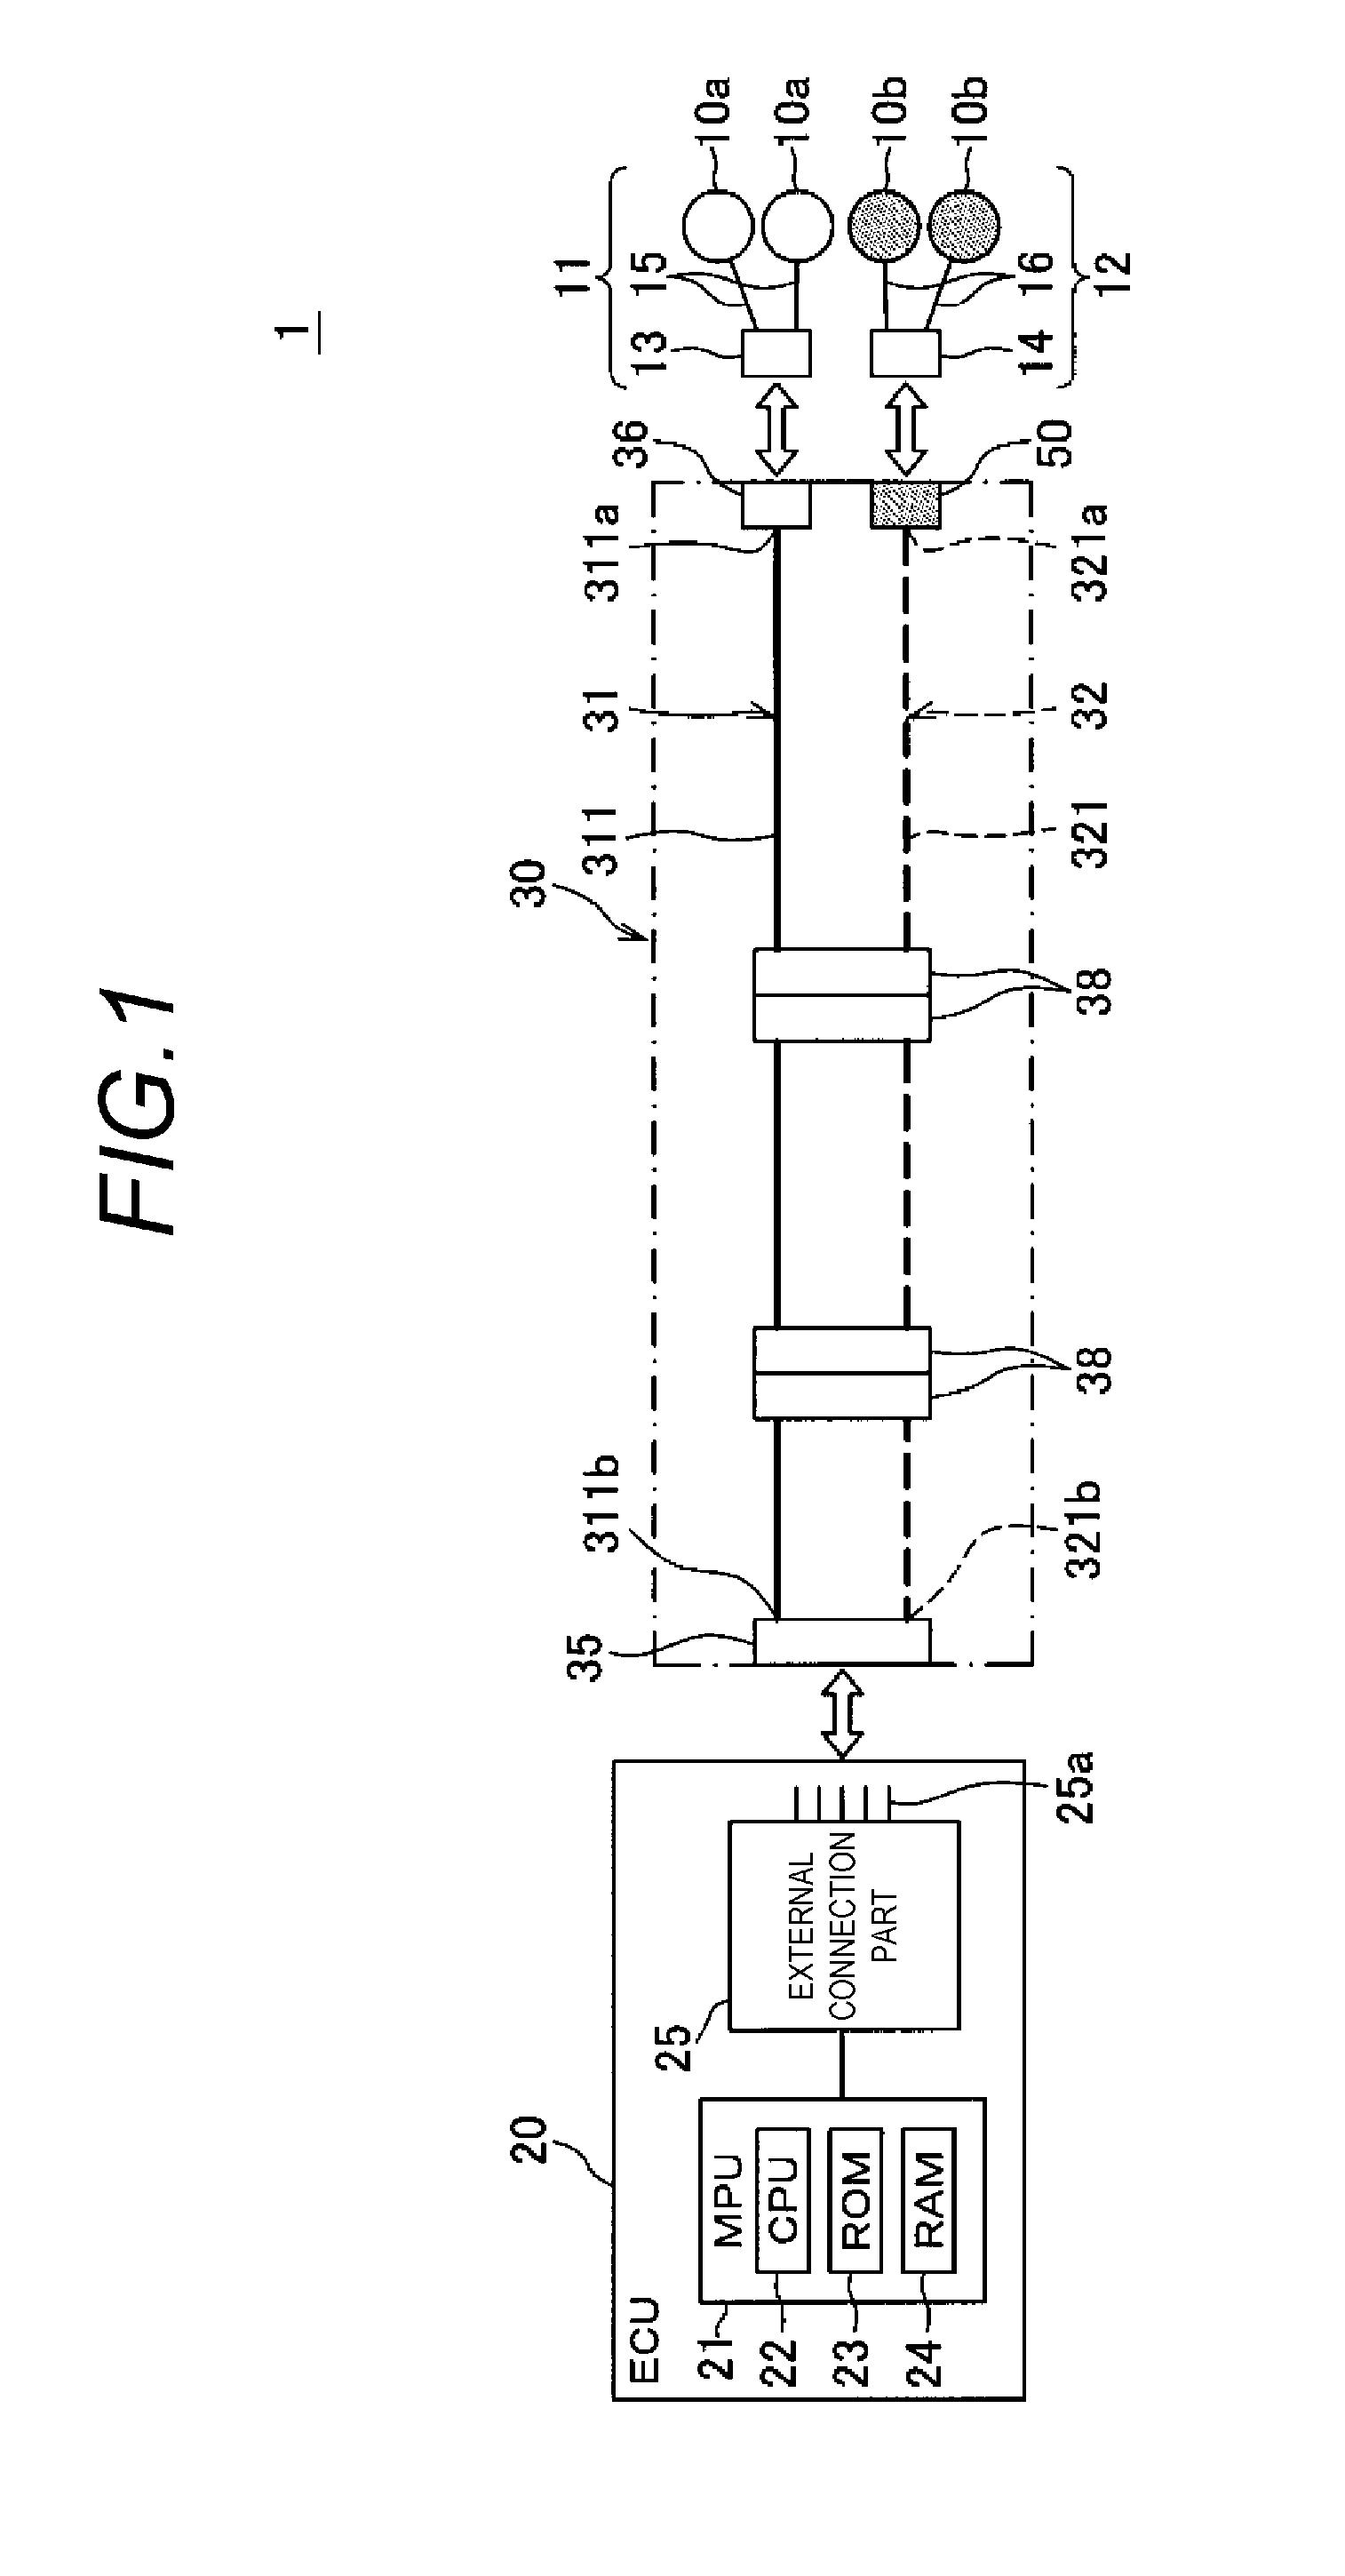 Wire harness and electronic device control system